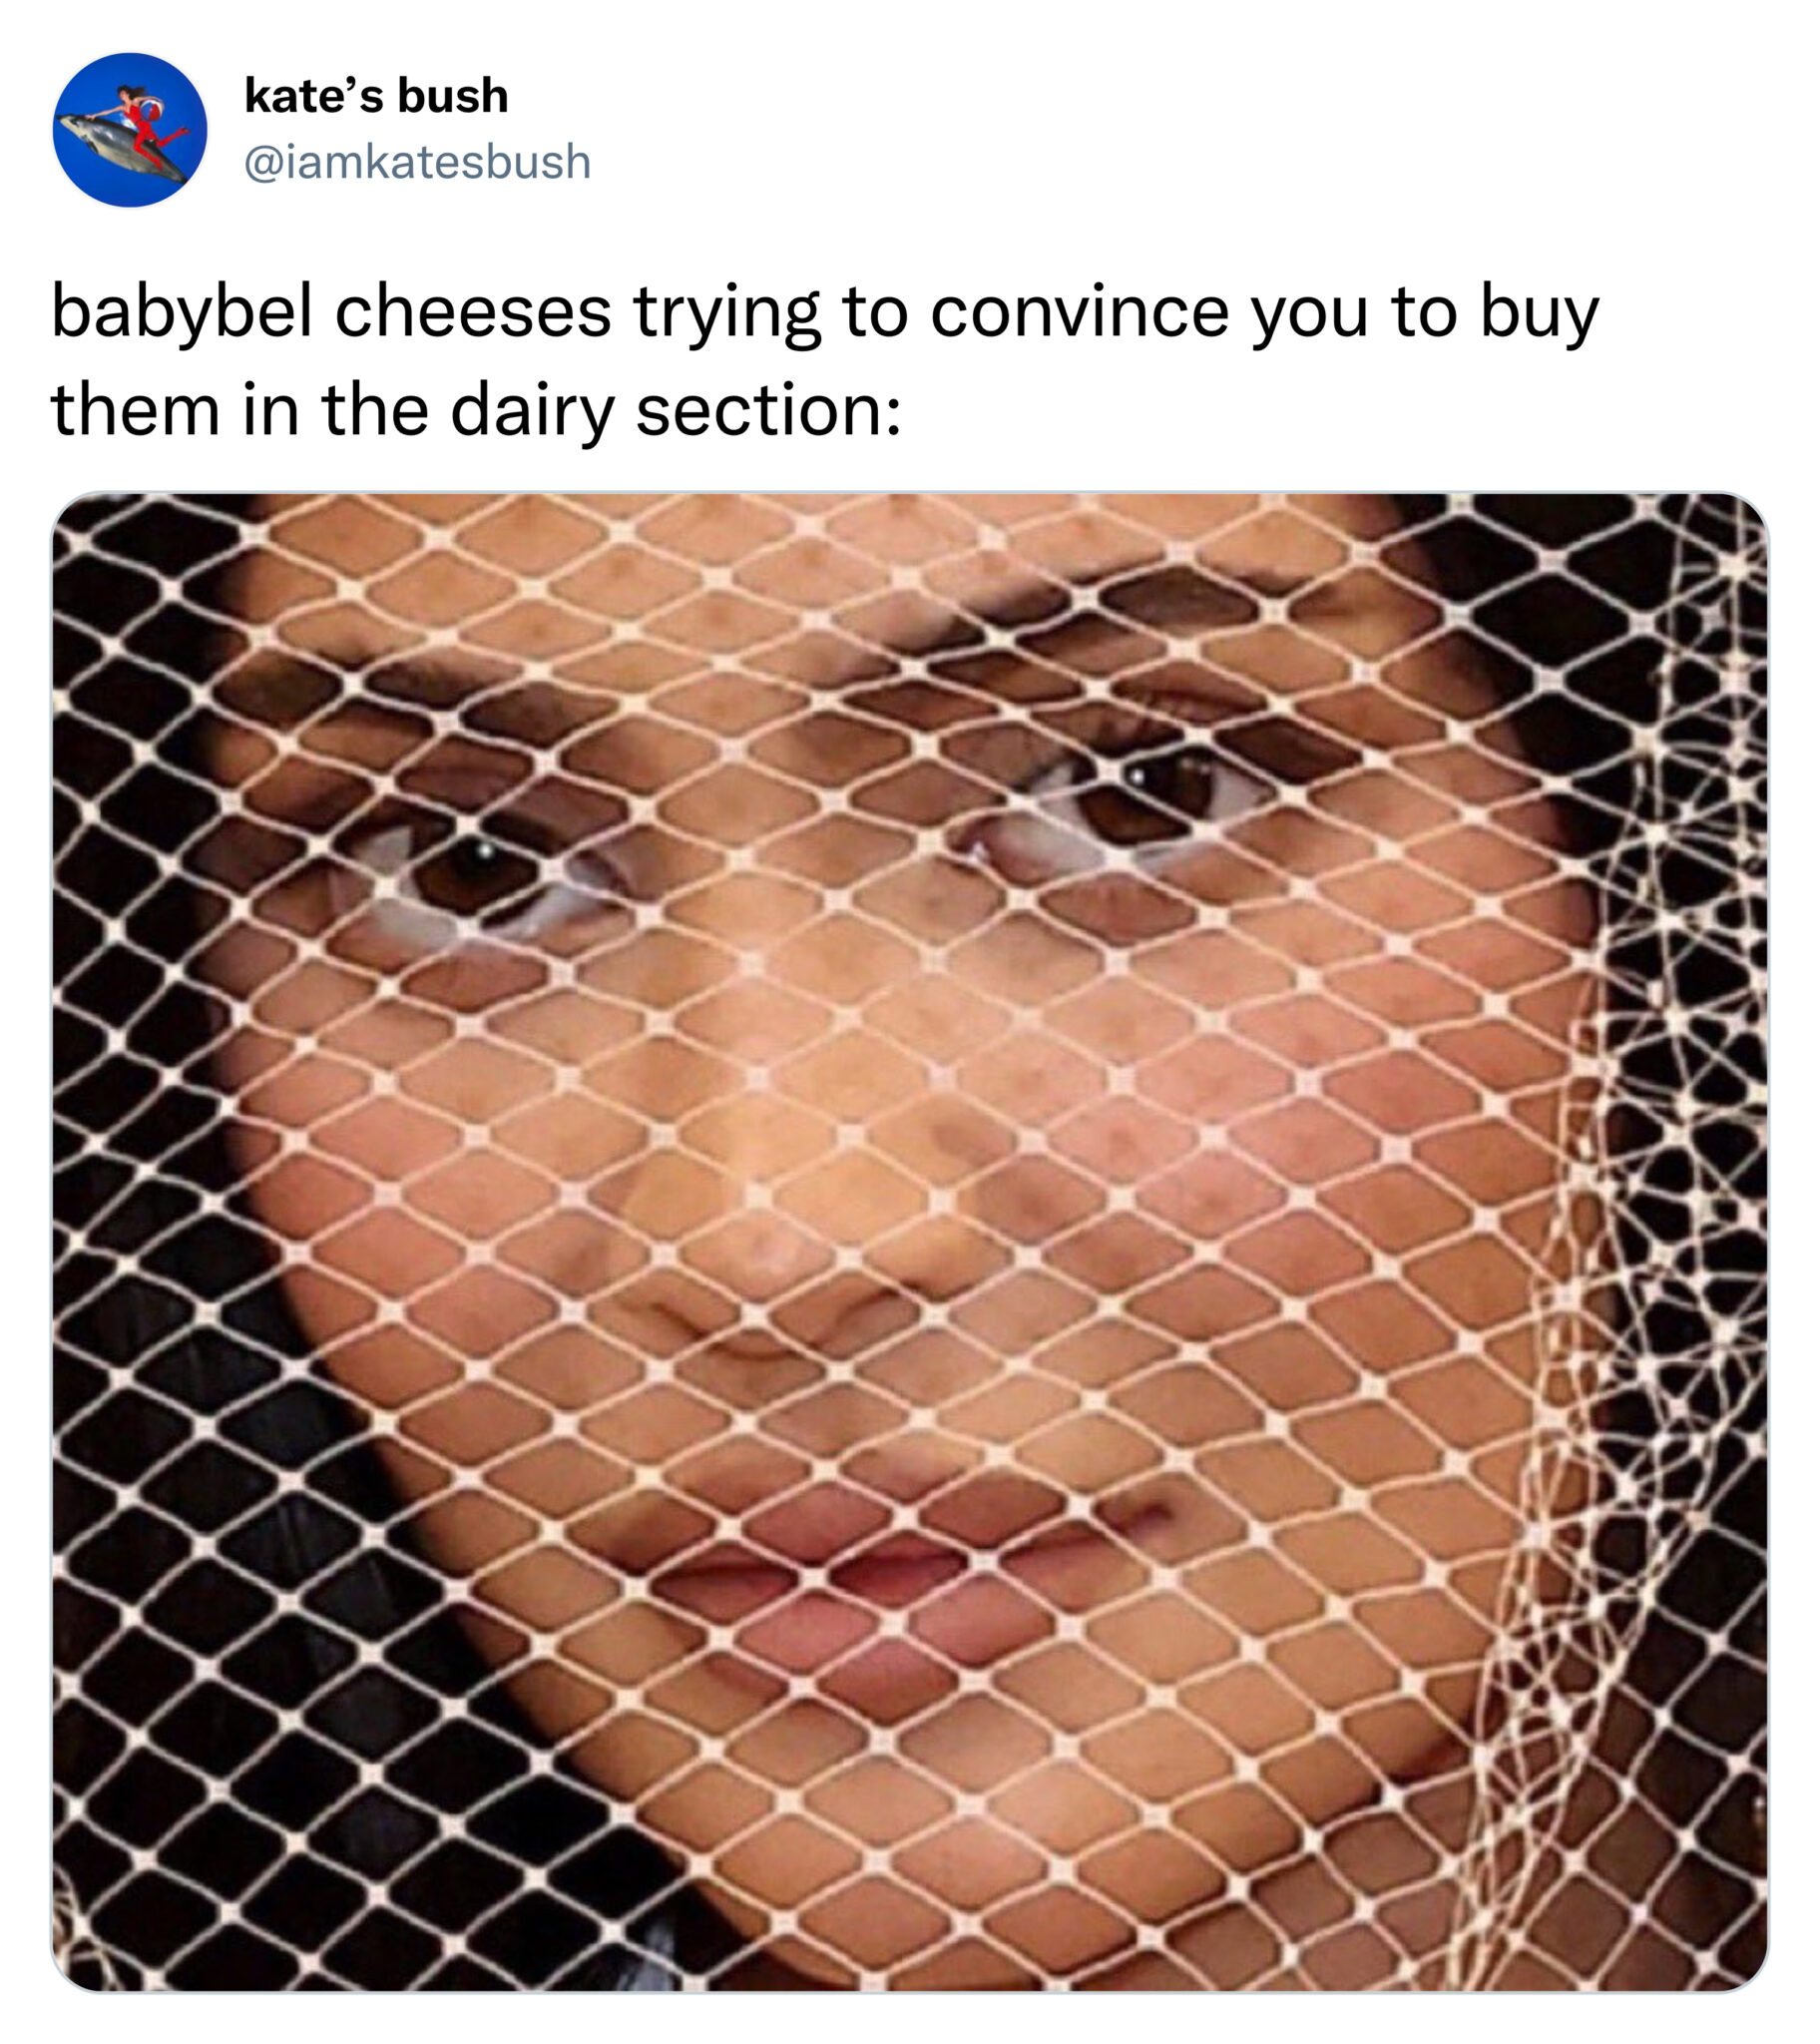 funny tweets --  kylie jenner met gala 2022 - kate's bush babybel cheeses trying to convince you to buy them in the dairy section